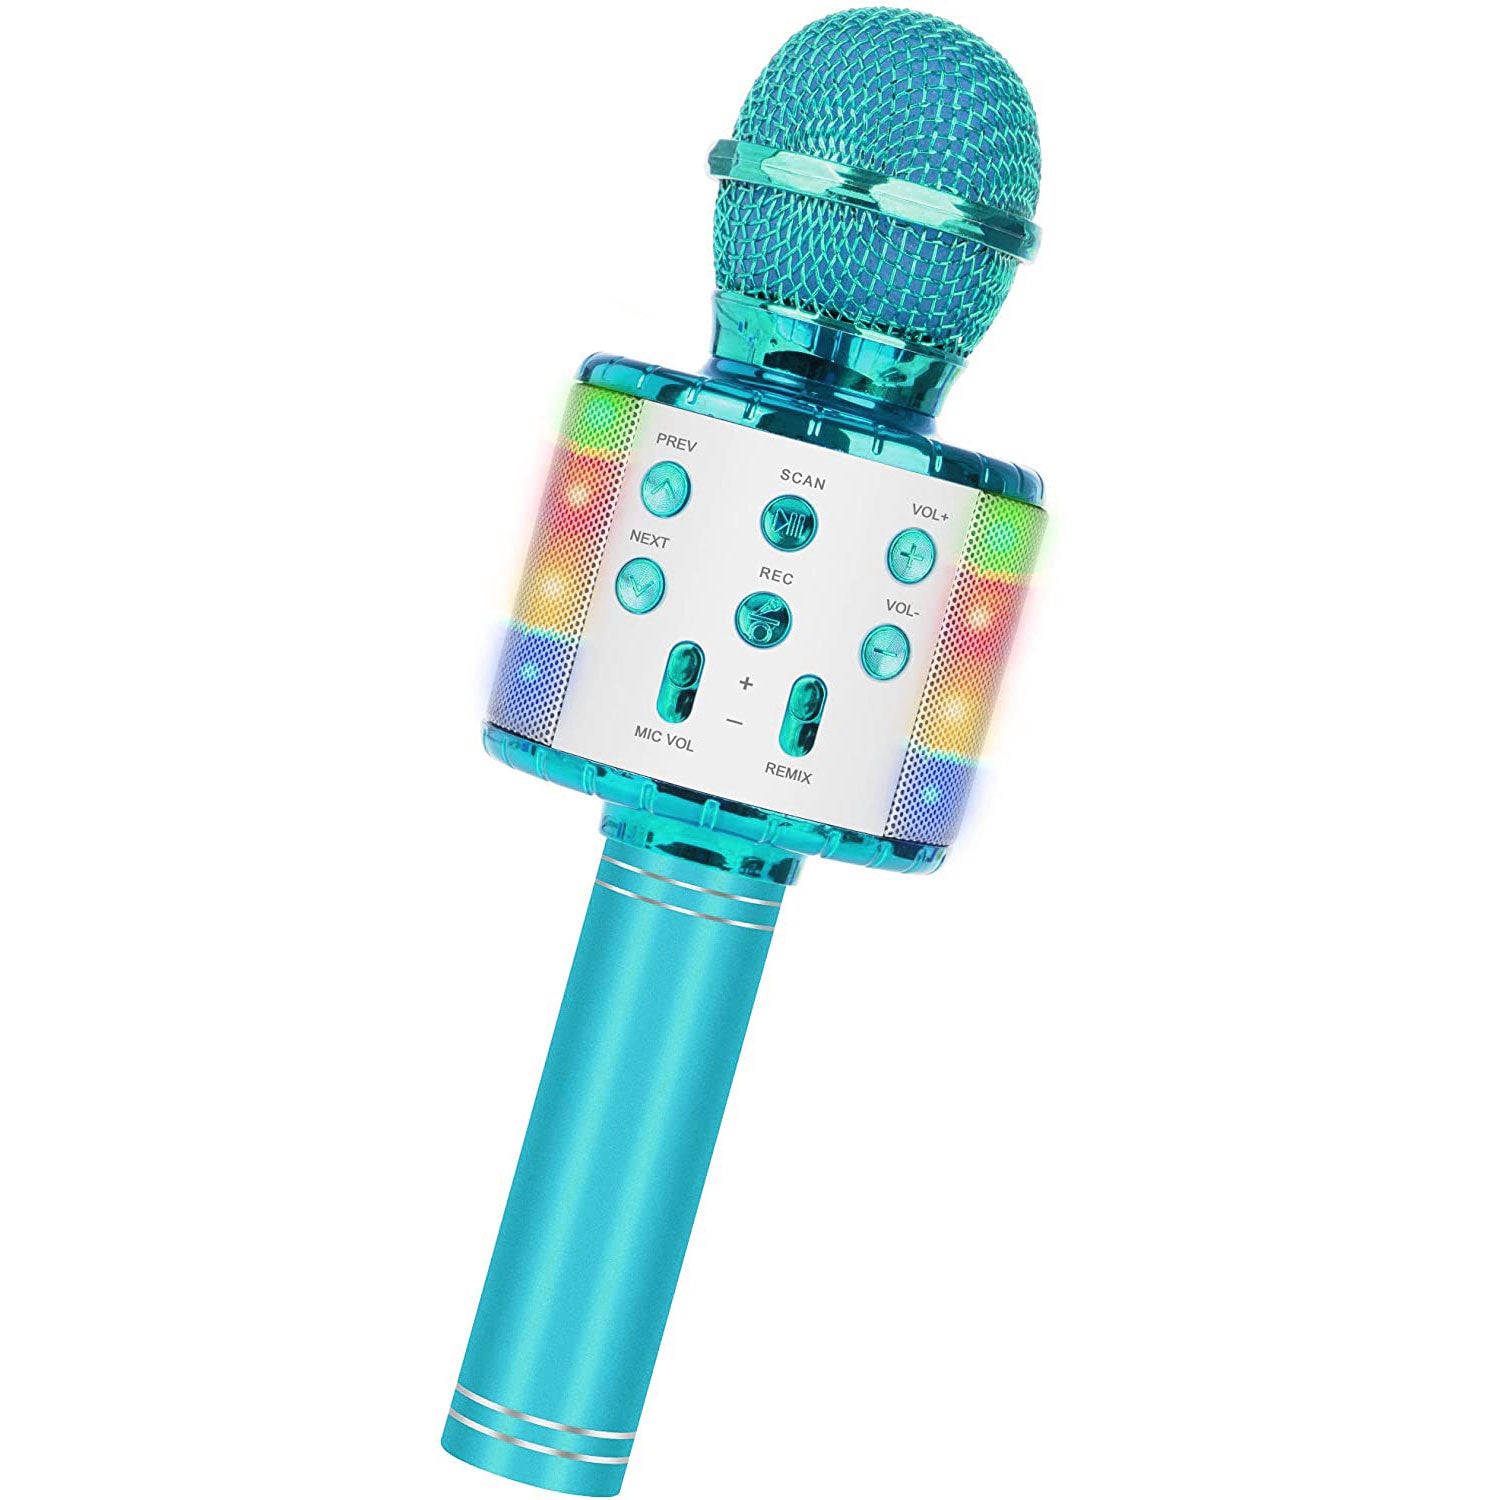 DS BS Bluetooth Wireless Handheld Microphone with LED Lights-Blue